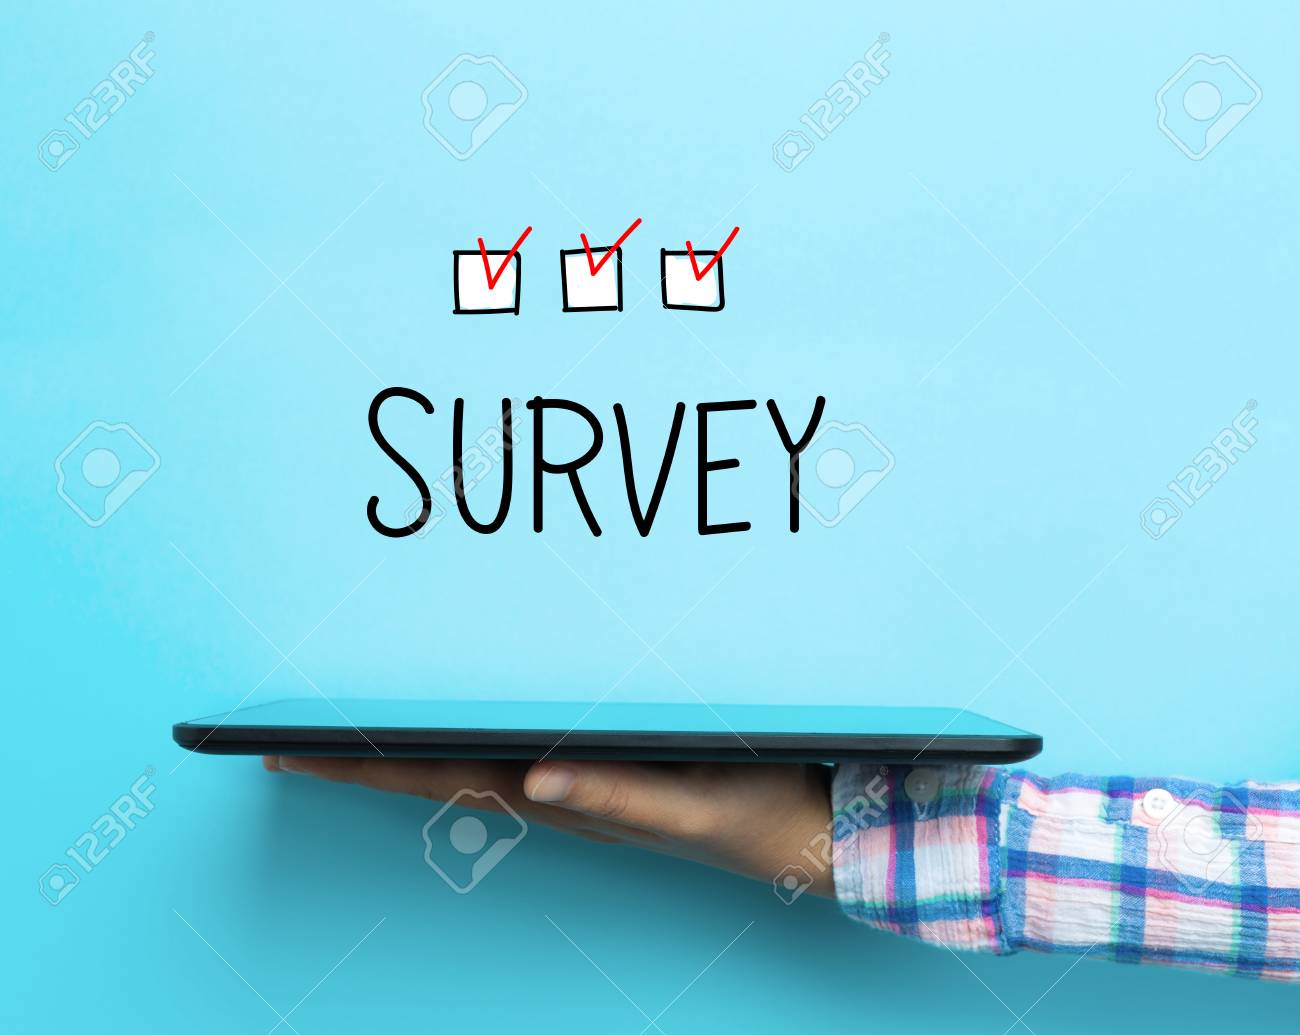 Survey Concept With A Tablet On Blue Background Stock Photo